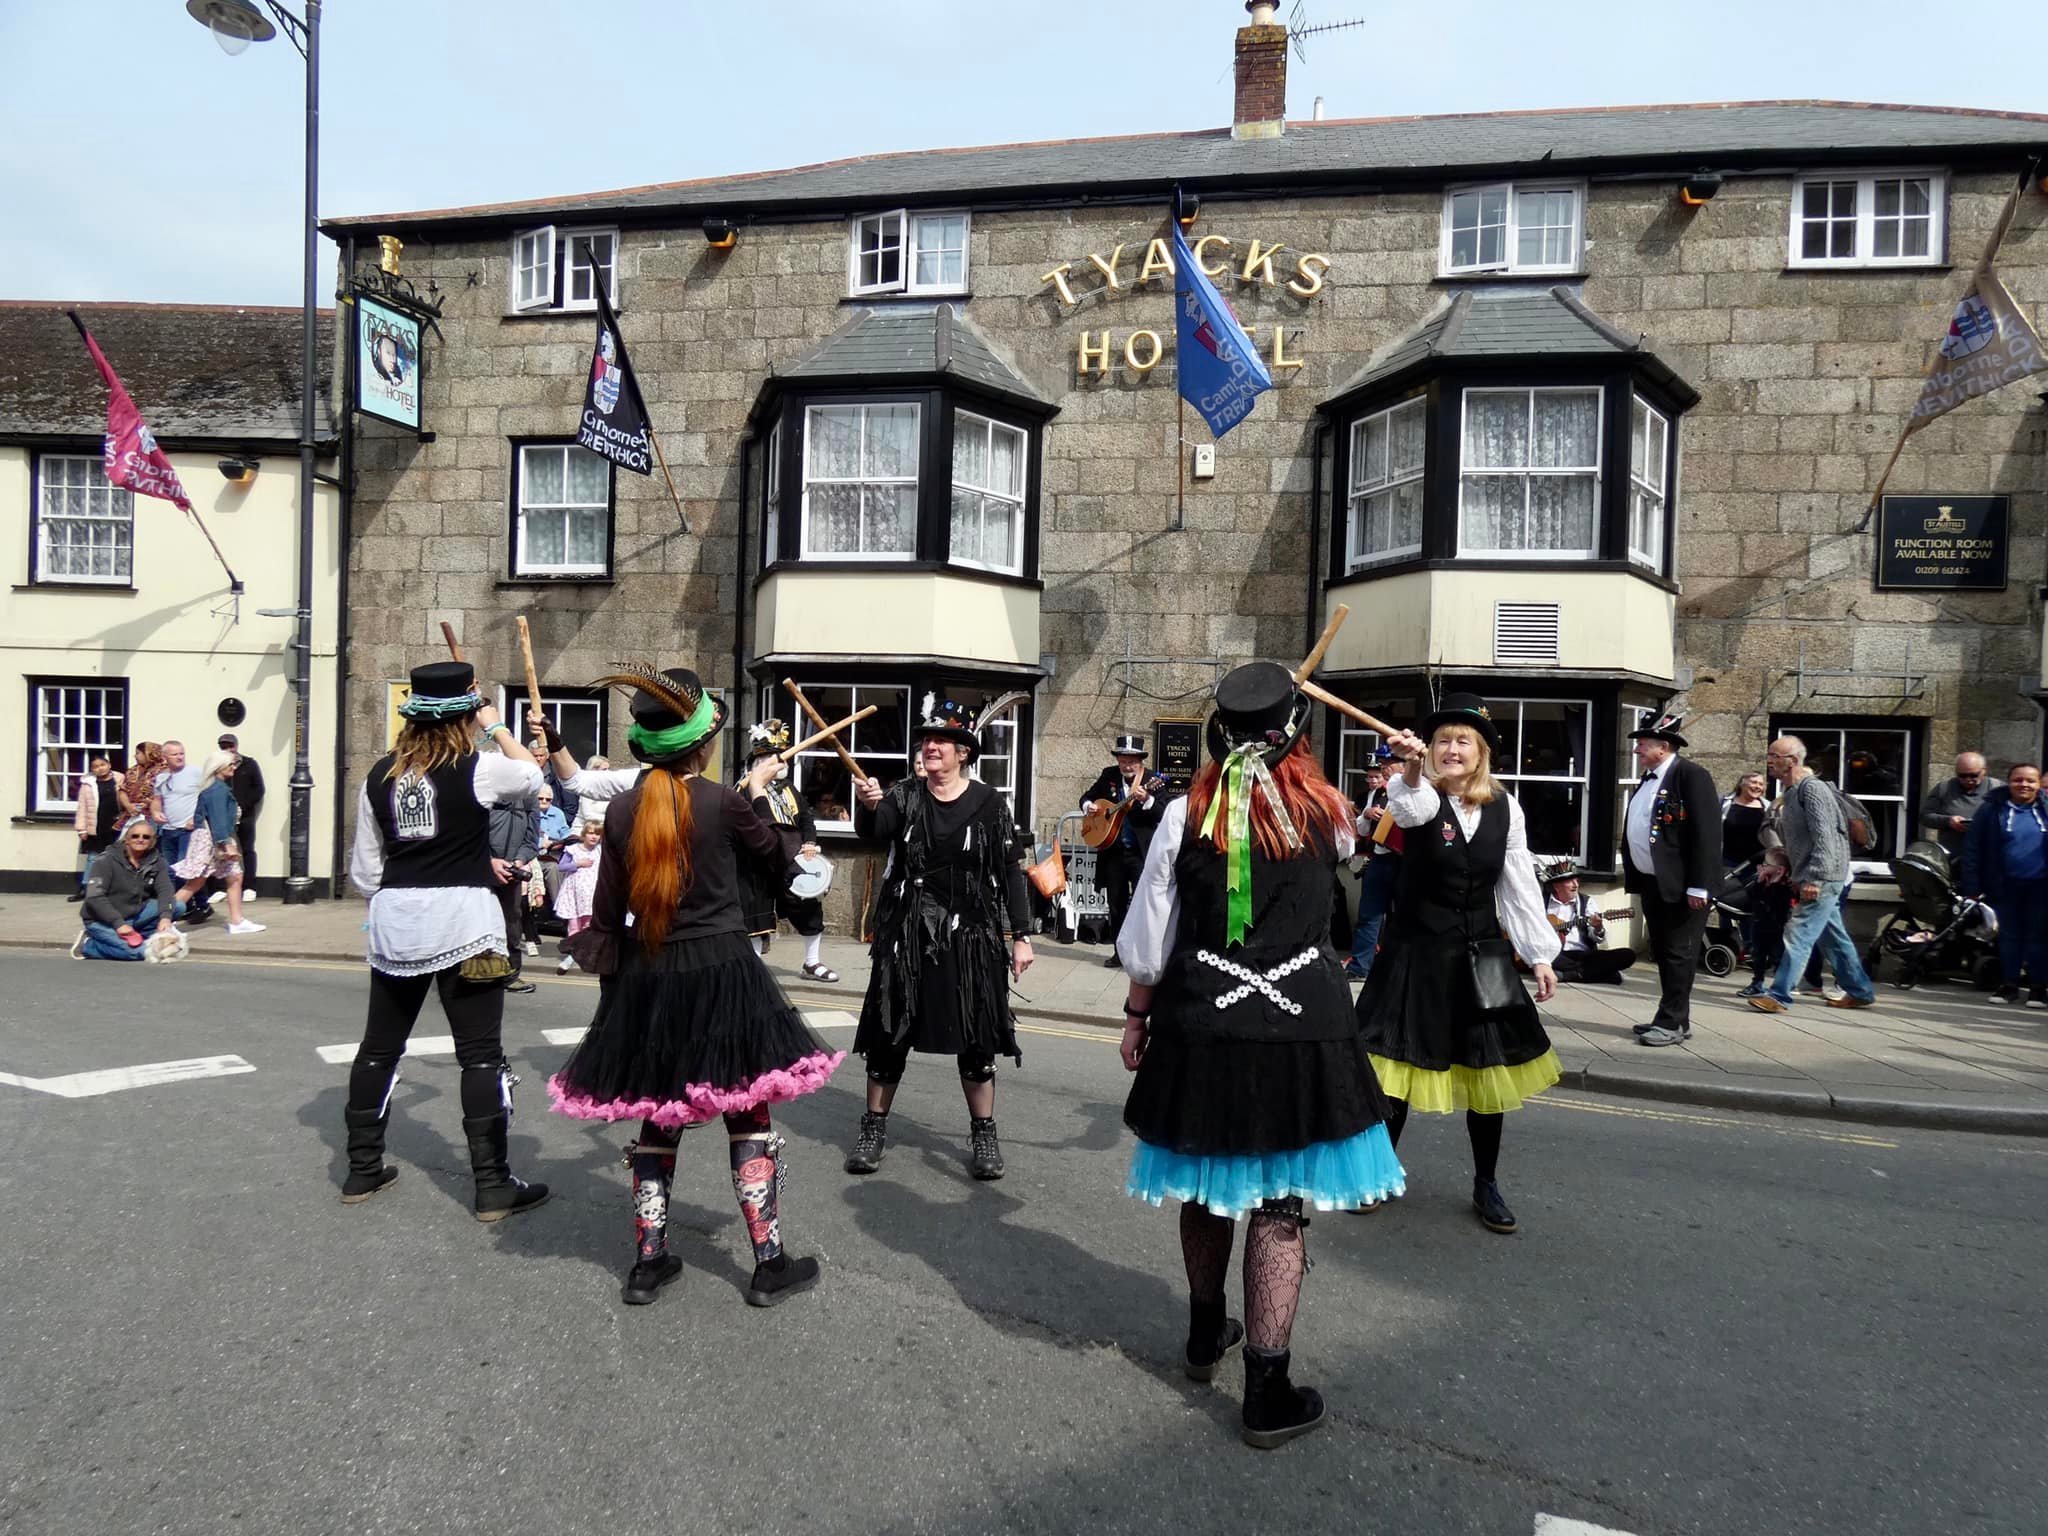 Folk dancing outside the Tyacks Hotel Picture: Jeanette Ruberry/Packet Camera Club